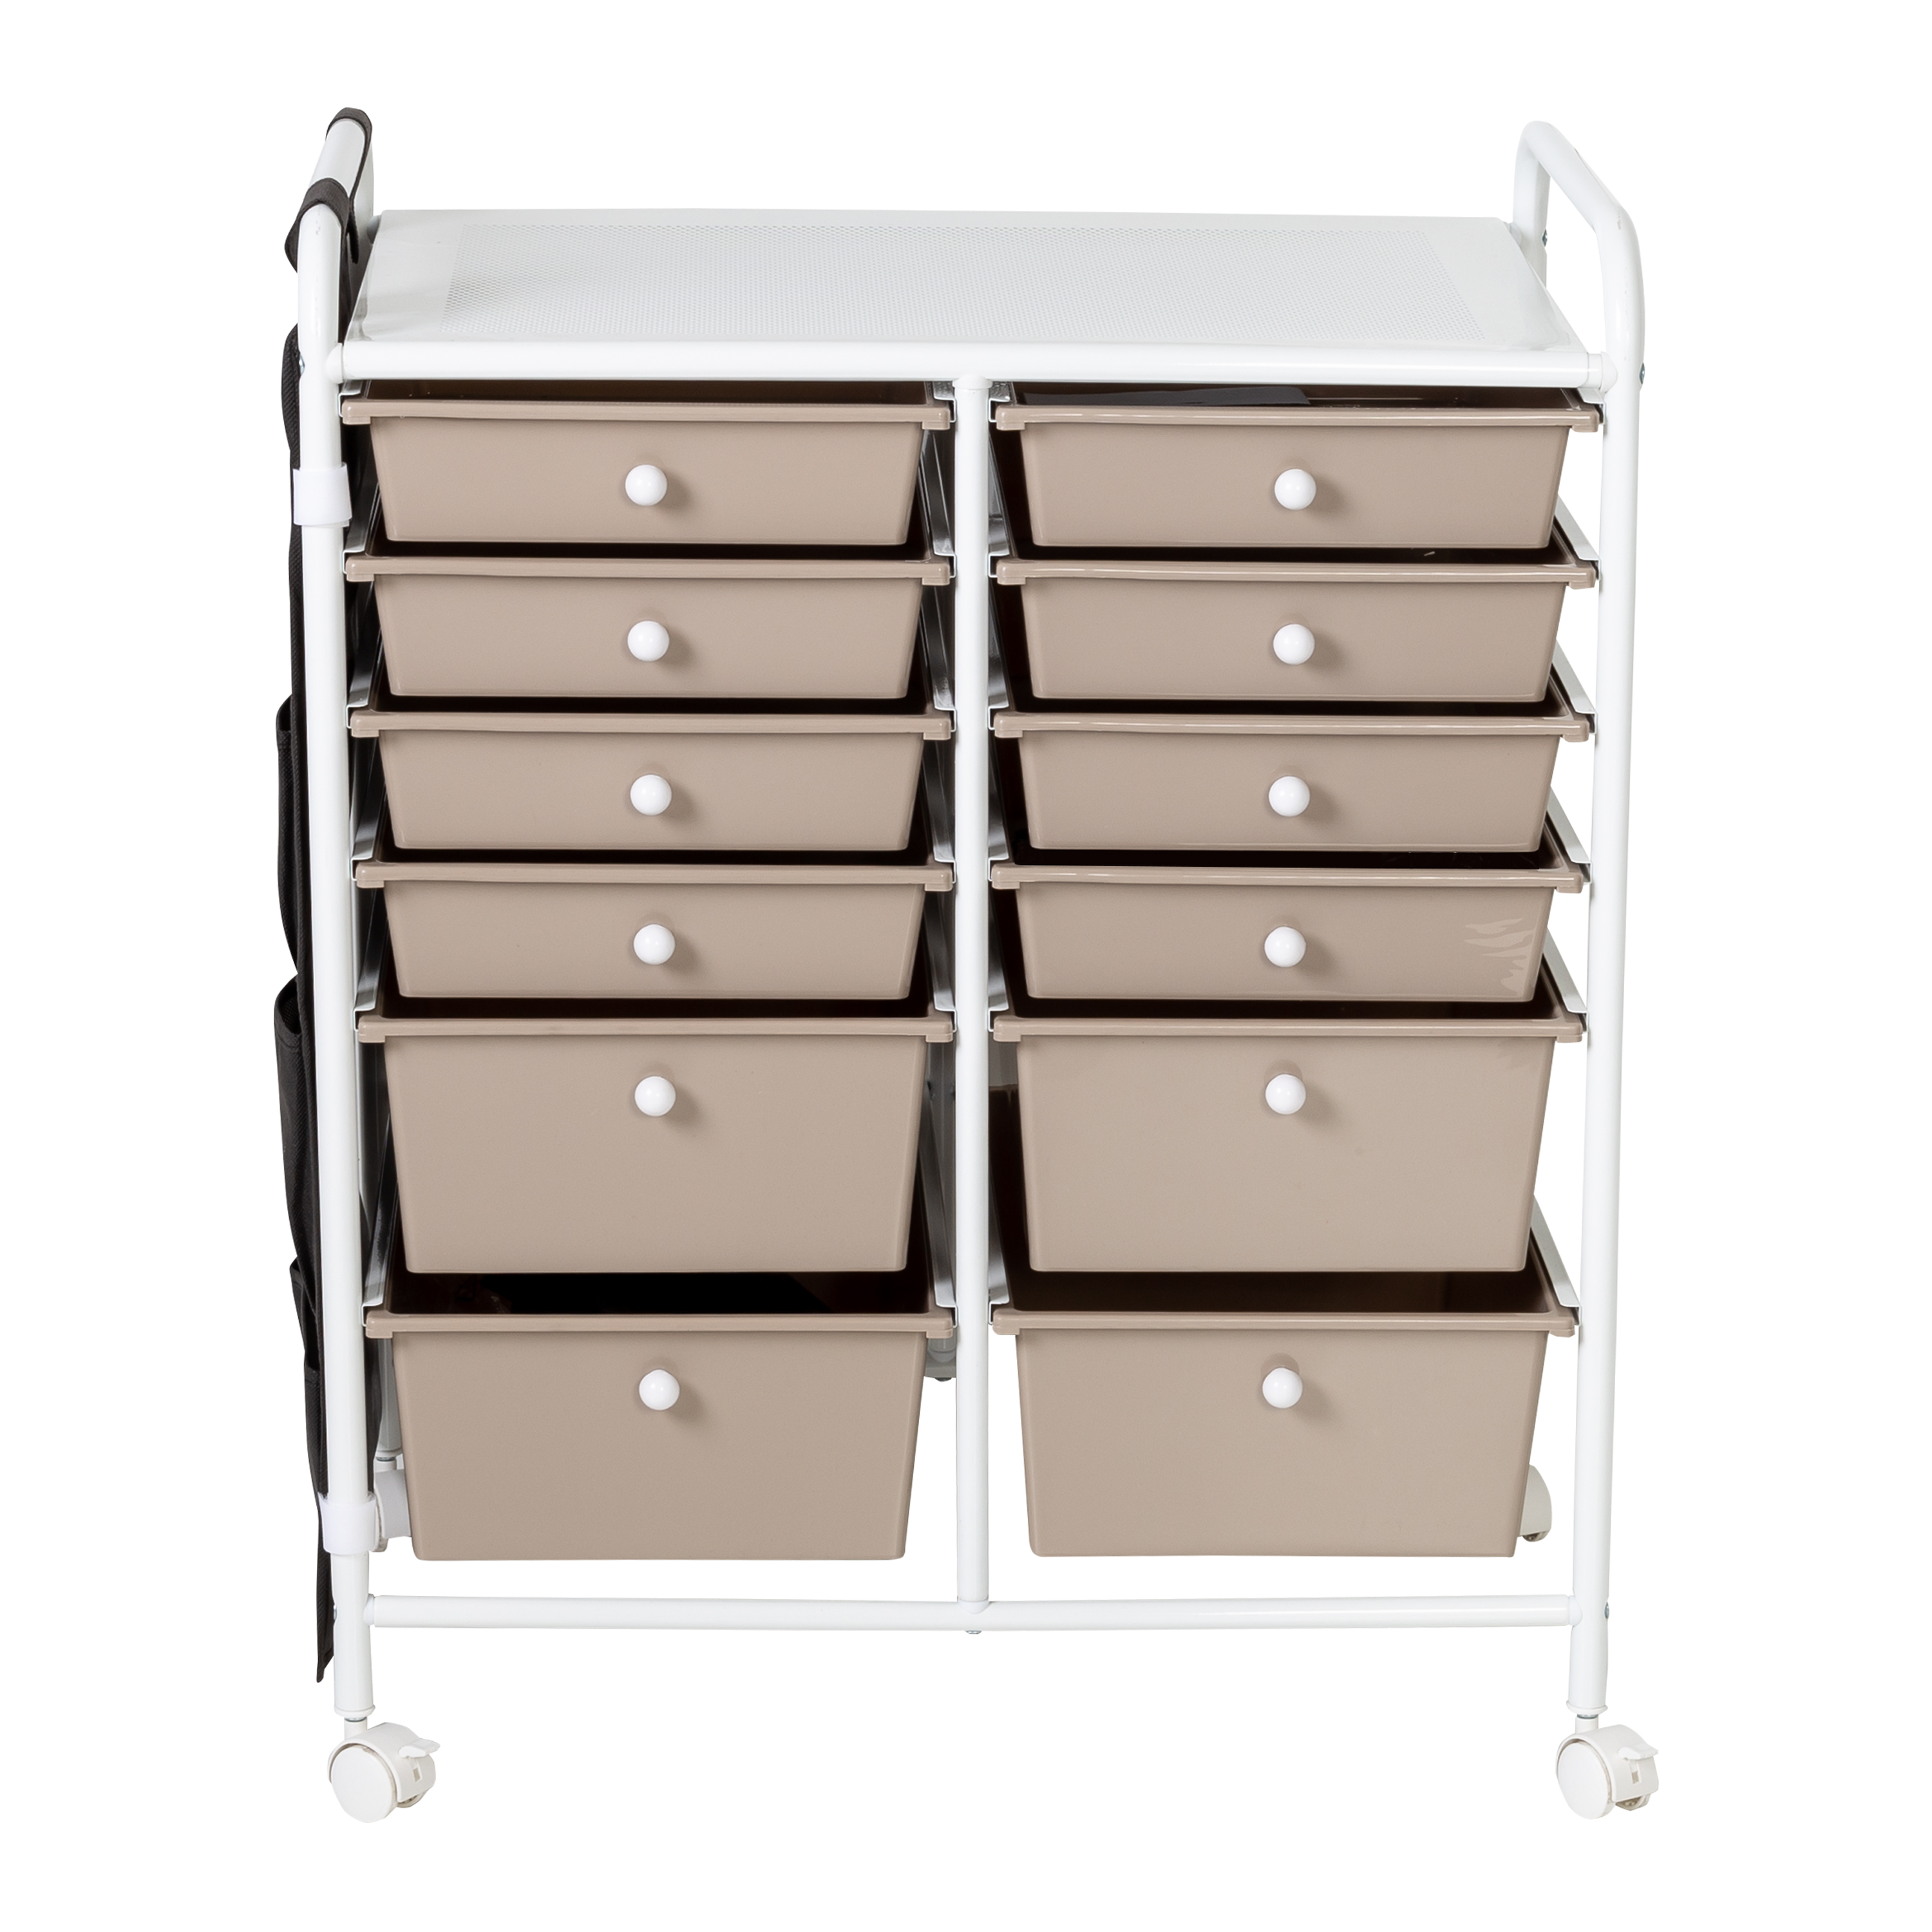 Honey-Can-Do 12-Drawer Metal Rolling Storage Cart with Black Fabric Side Pockets, Beige/White - image 3 of 13